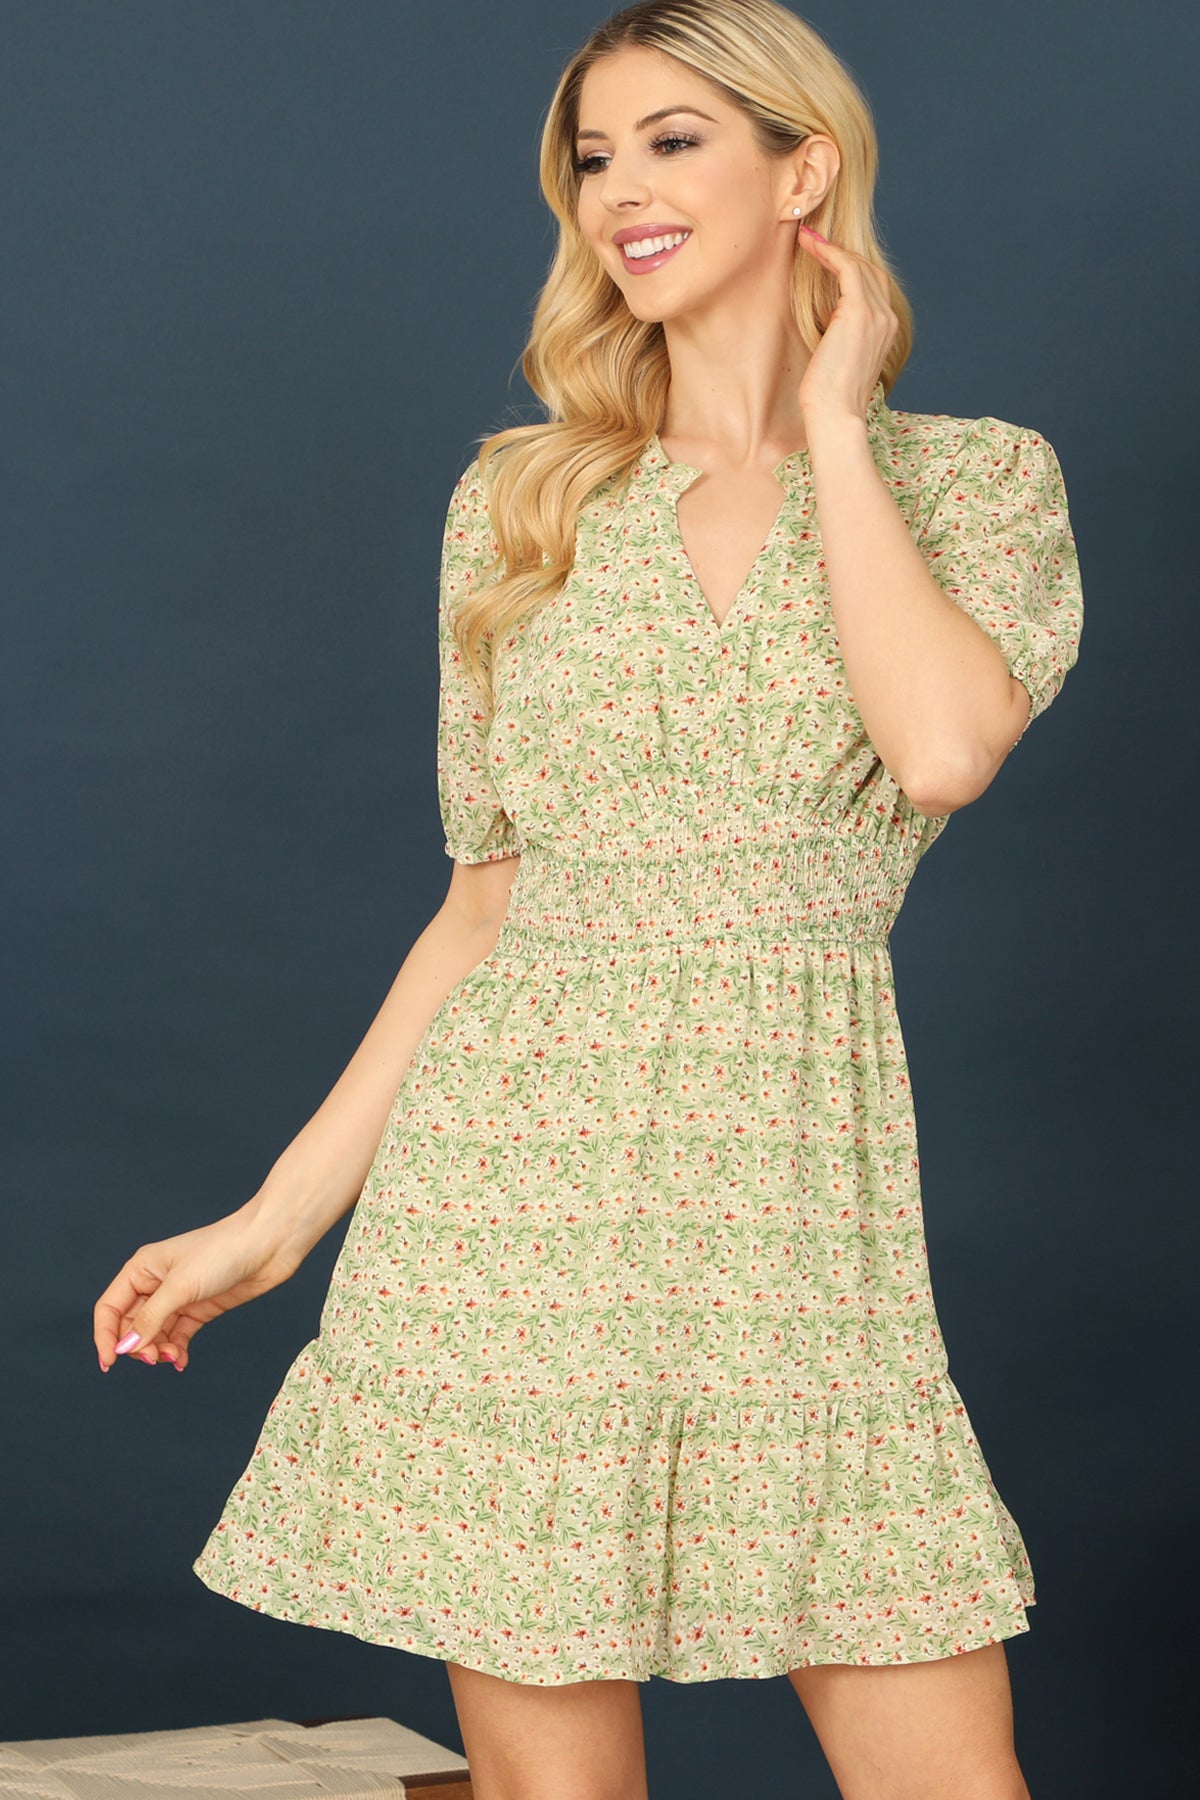 NOTCH NECK PUFF SLEEVE SMOCKED WAIST FLORAL DRESS 2-2-2 (NOW $ 6.75 ONLY!)